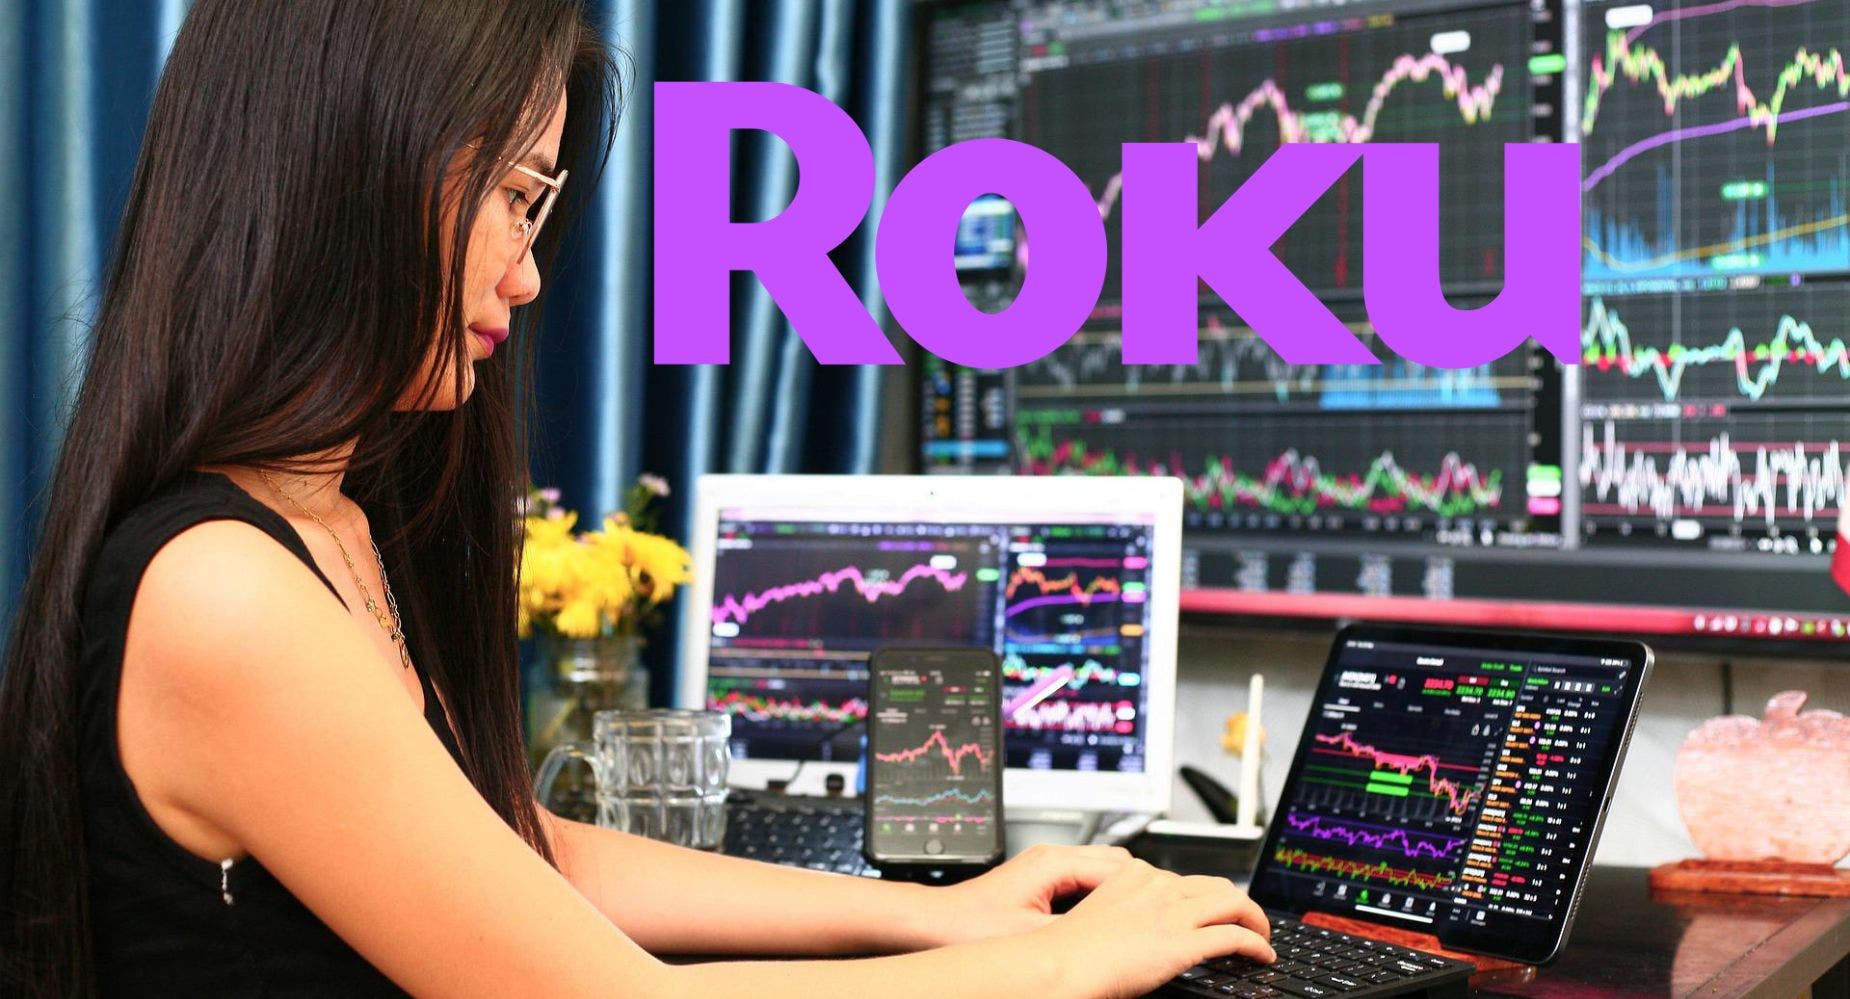 Is Roku About To Shoot Up Higher? A Look At The Streaming Stock For The Week Ahead